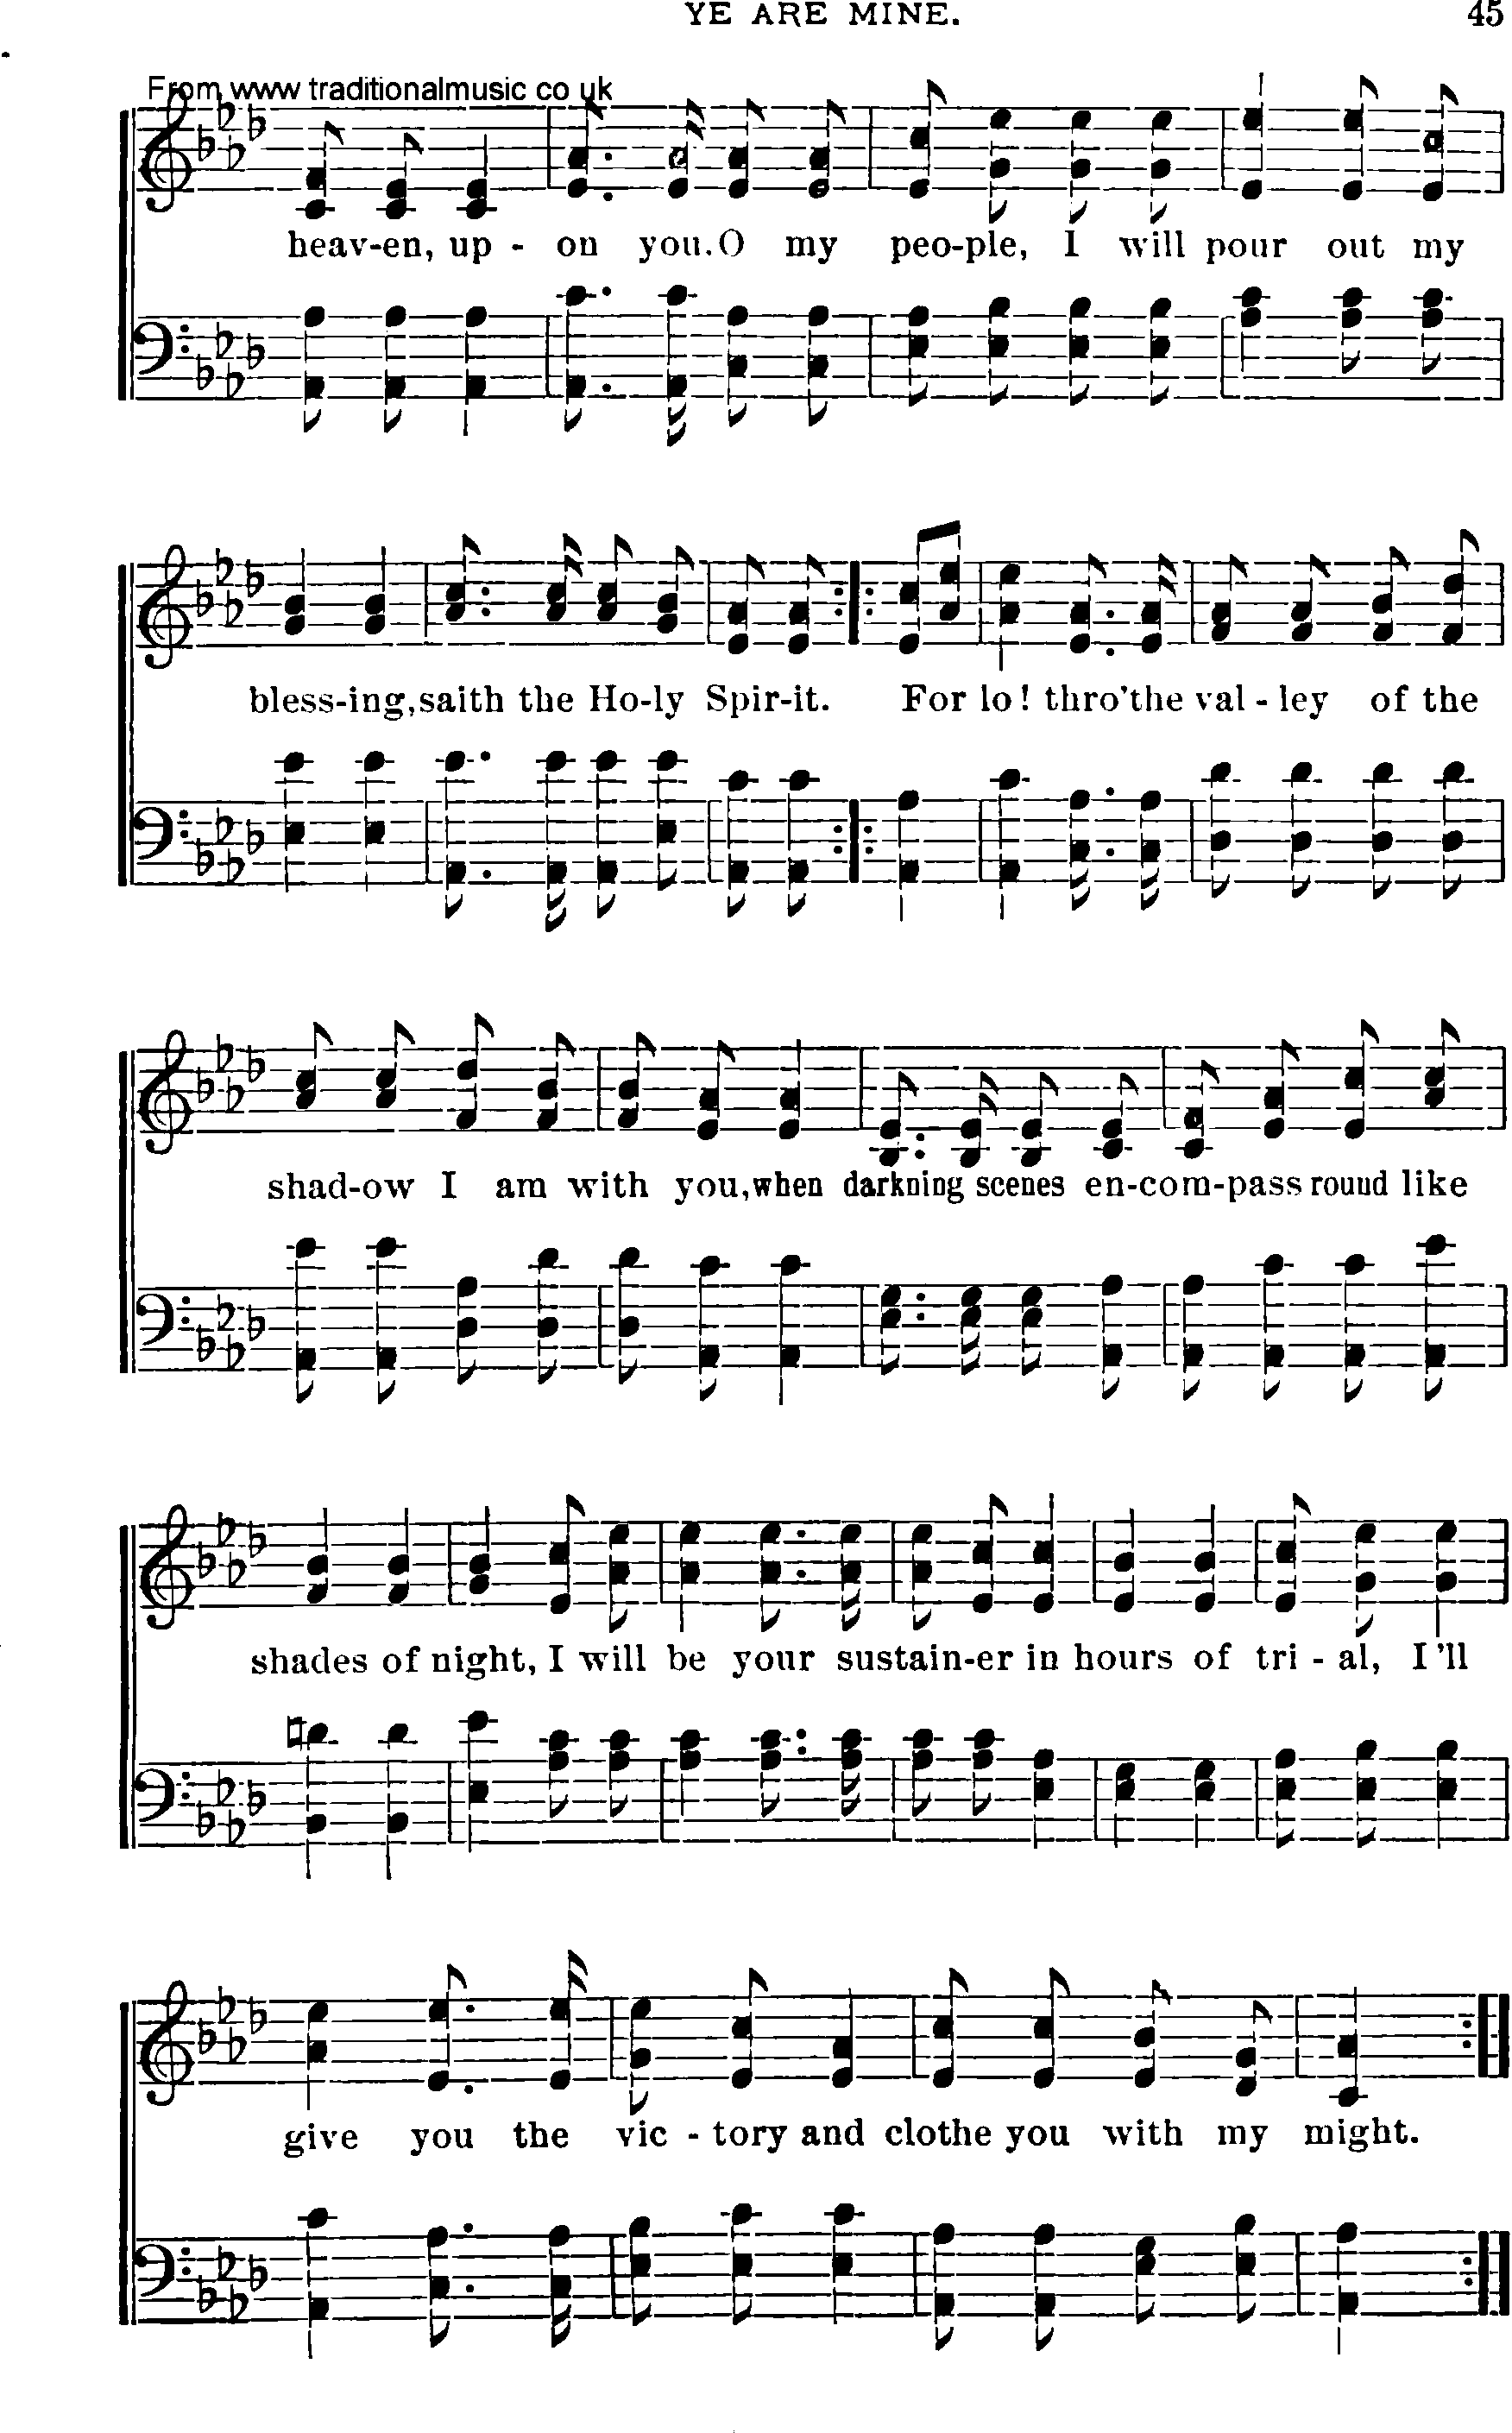 Shaker Music collection, Hymn: you are mine, sheetmusic and PDF